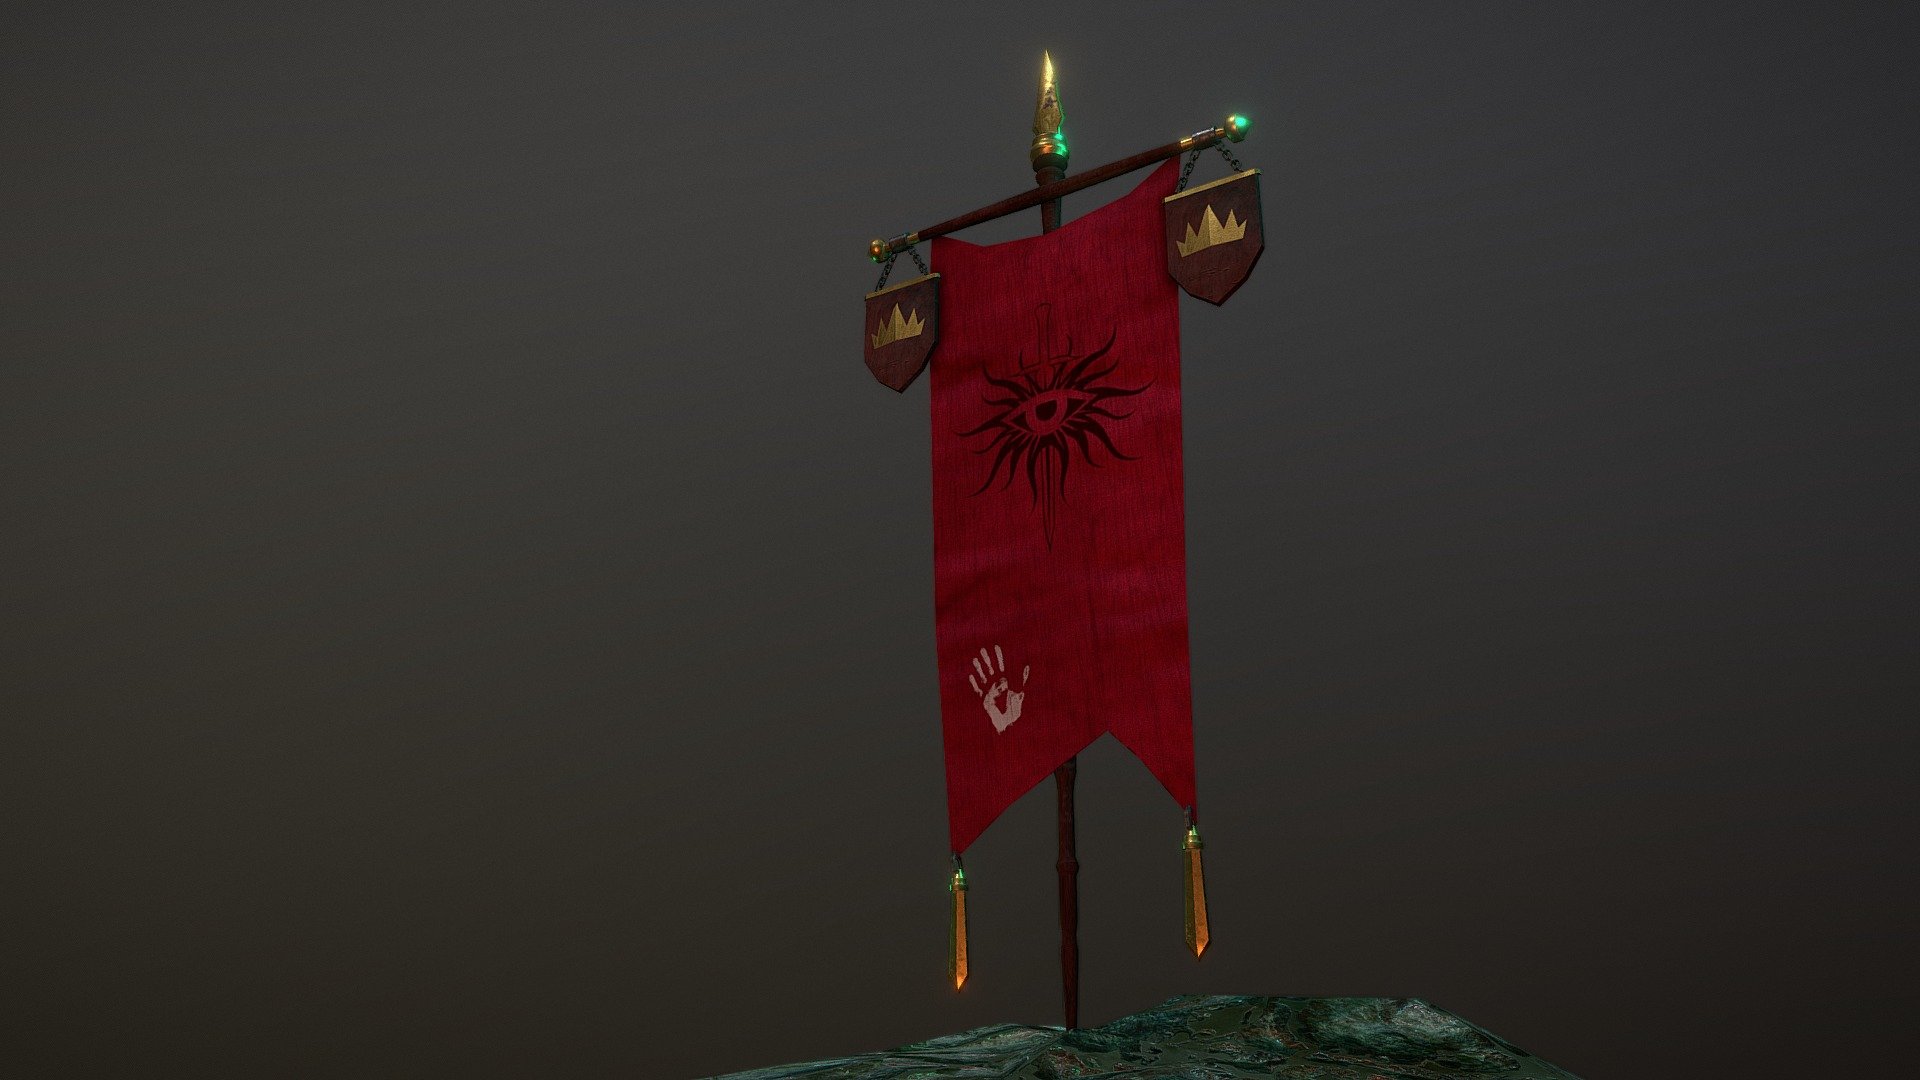 In this project, I've made a banner after a Dragon Age Inquisition concept.
Modeled in Maya, maps are baked in Marmoset Toolbag and textured in Substance Painter 3d model